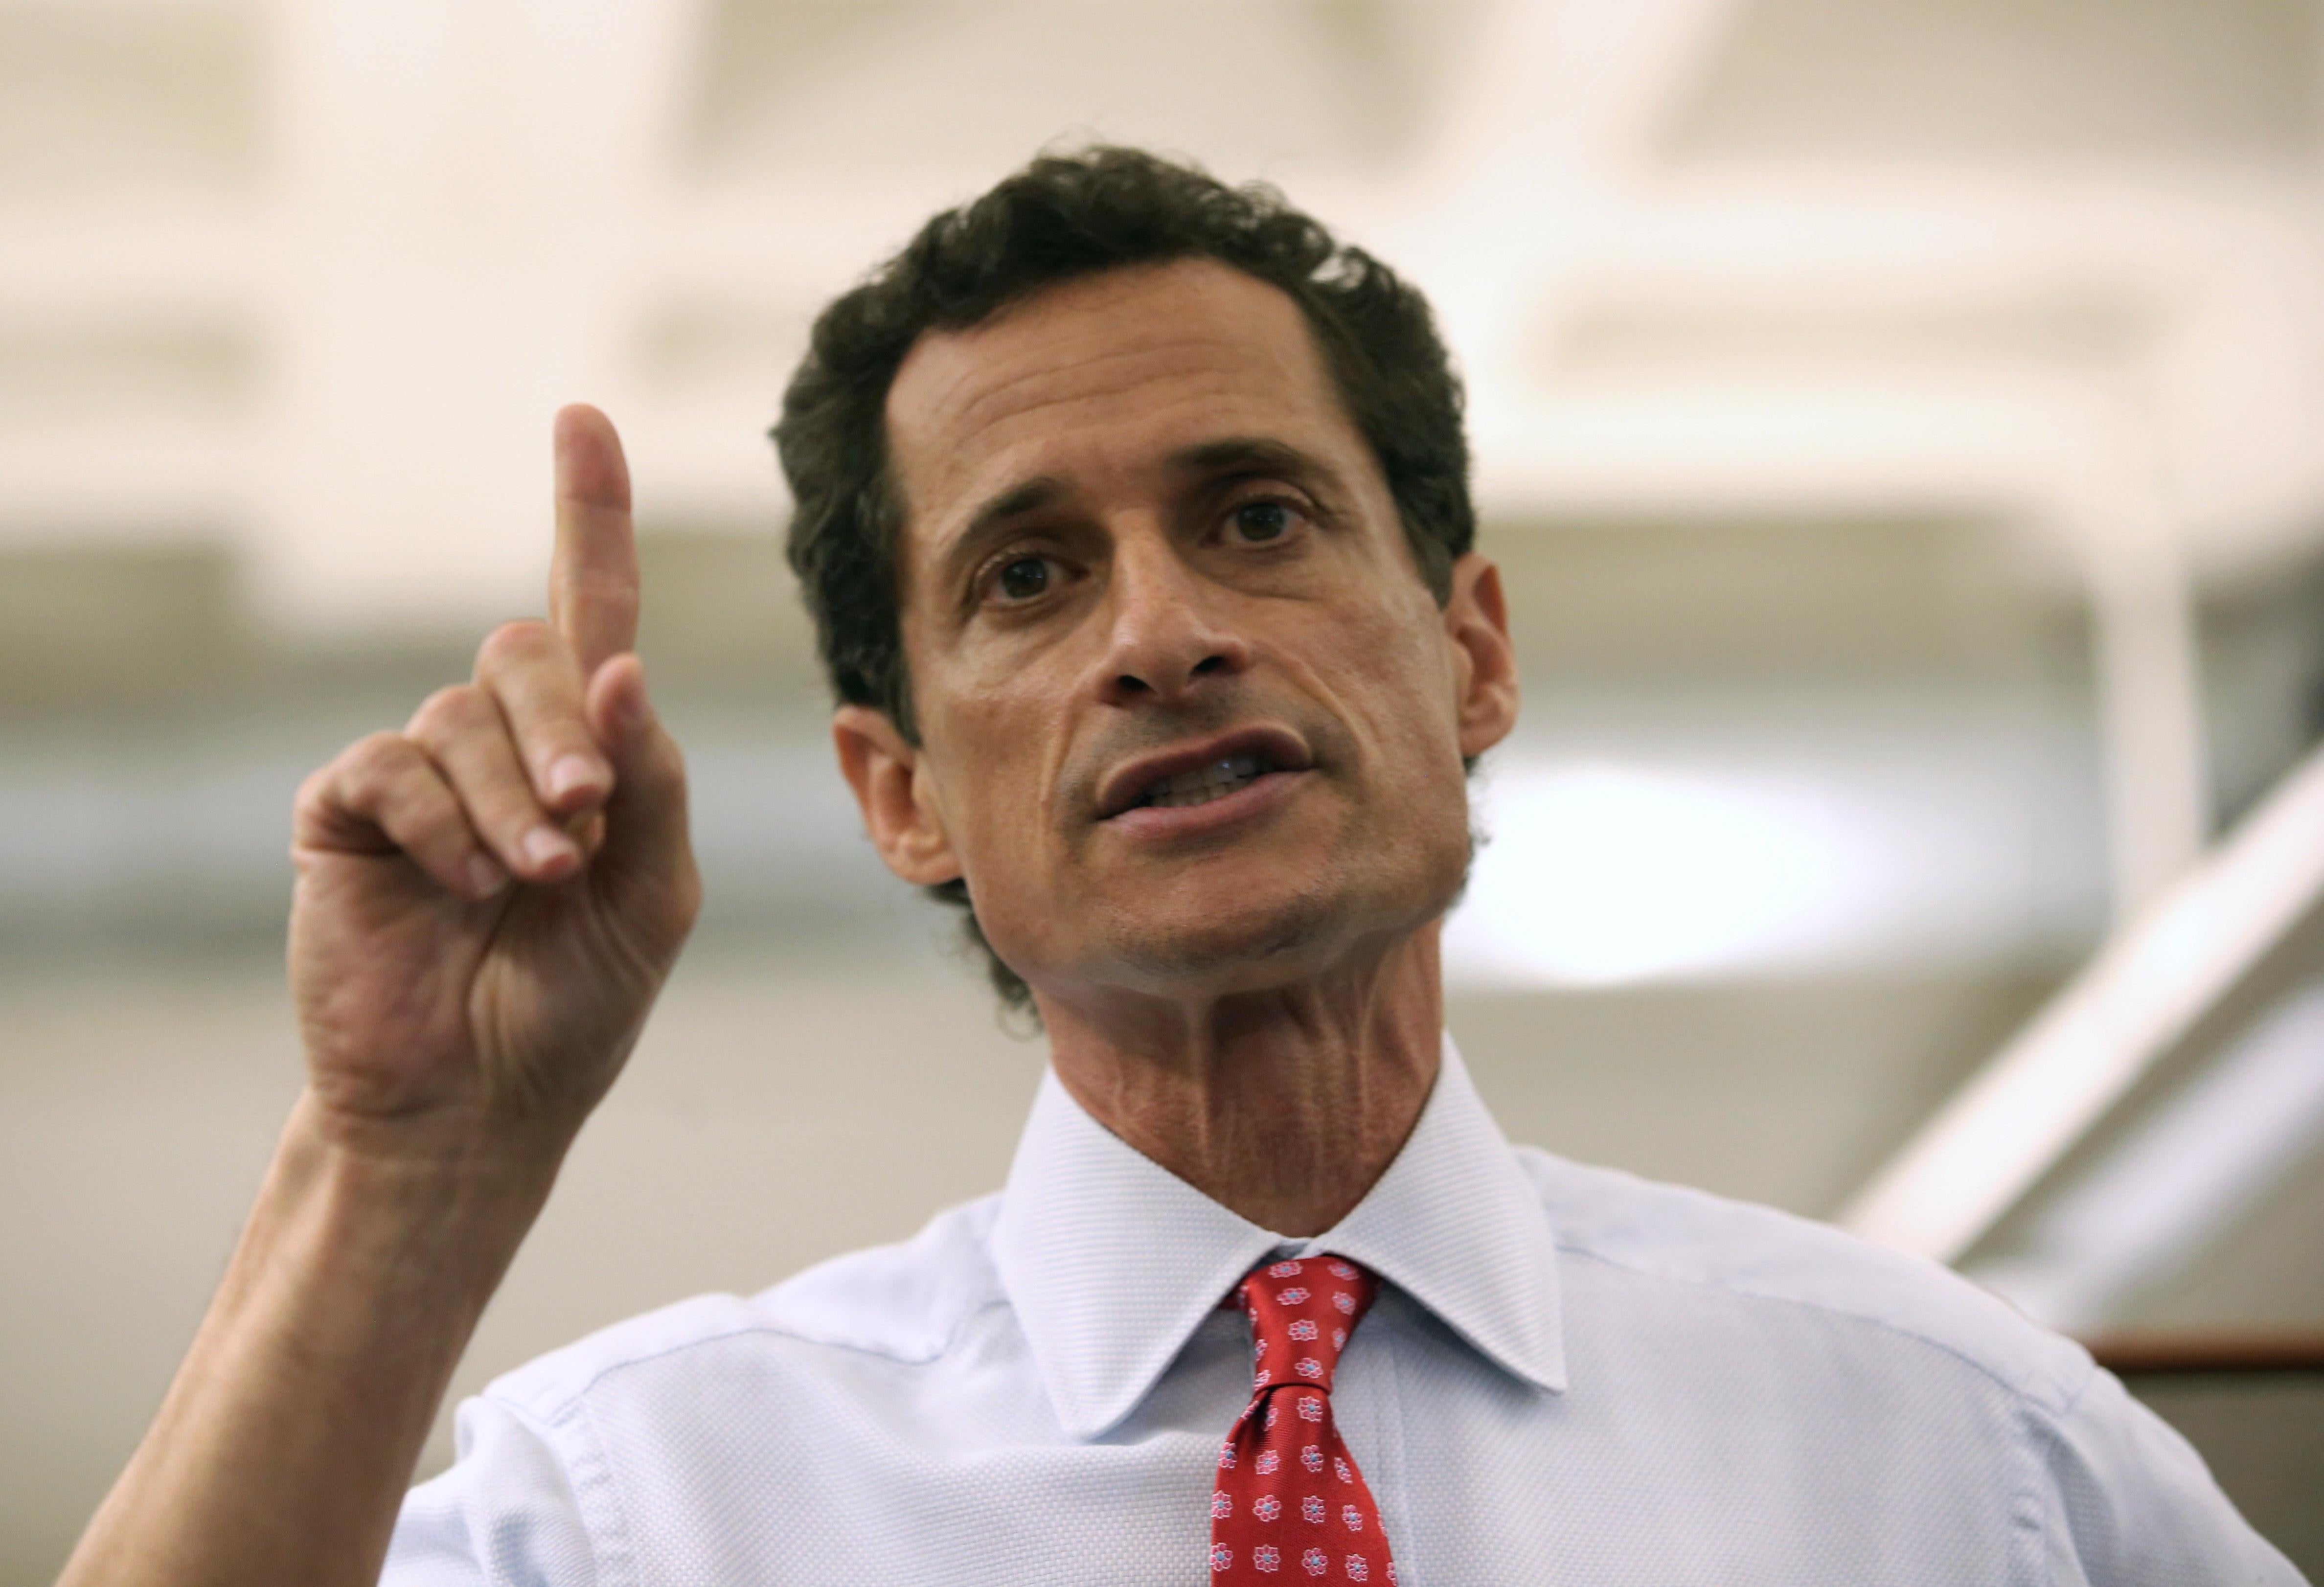 Anthony Weiner, a leading candidate for New York City mayor, answers questions during a press conference.